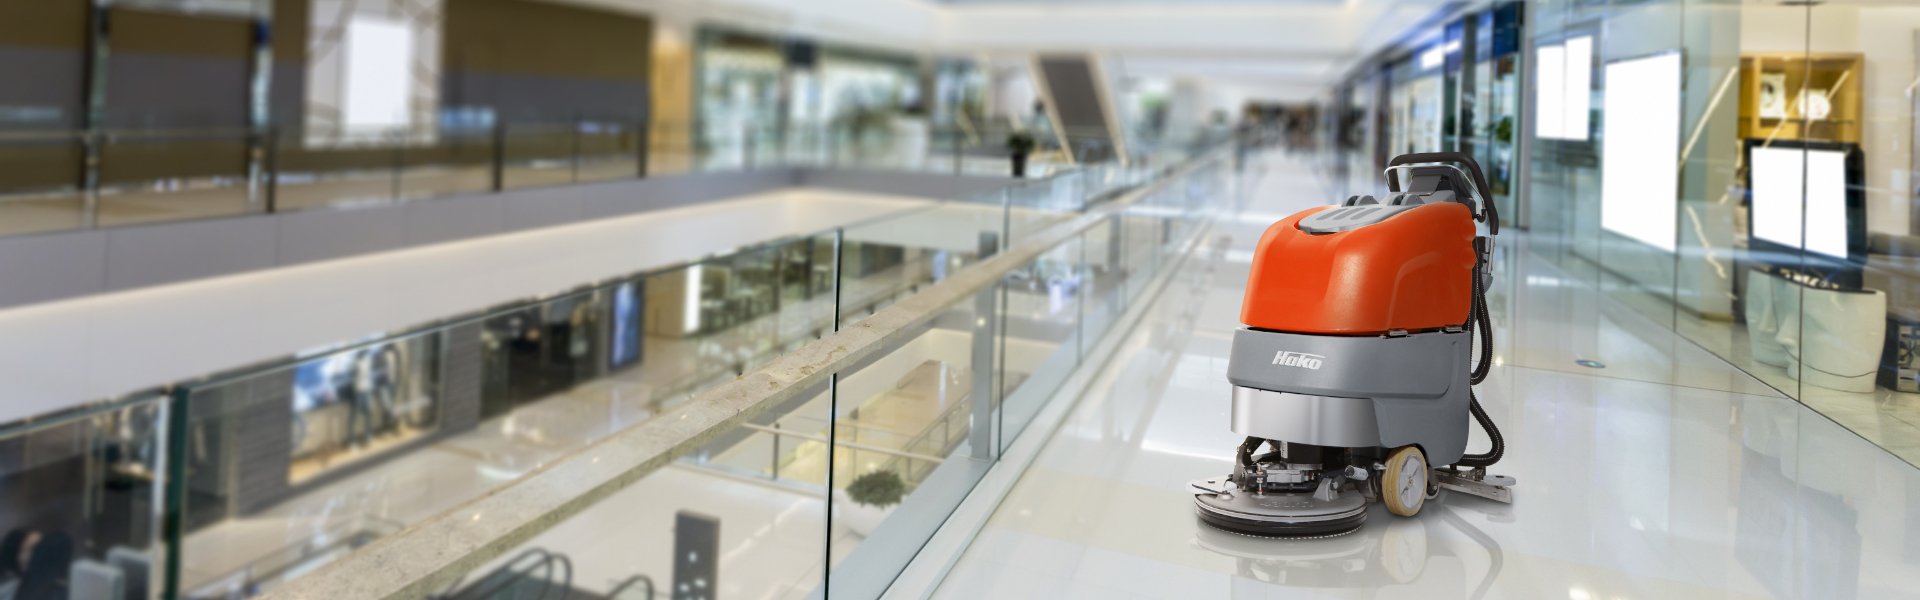 Automatic Floor Scrubbers: Spotless and Healthy Shopping Center Floors